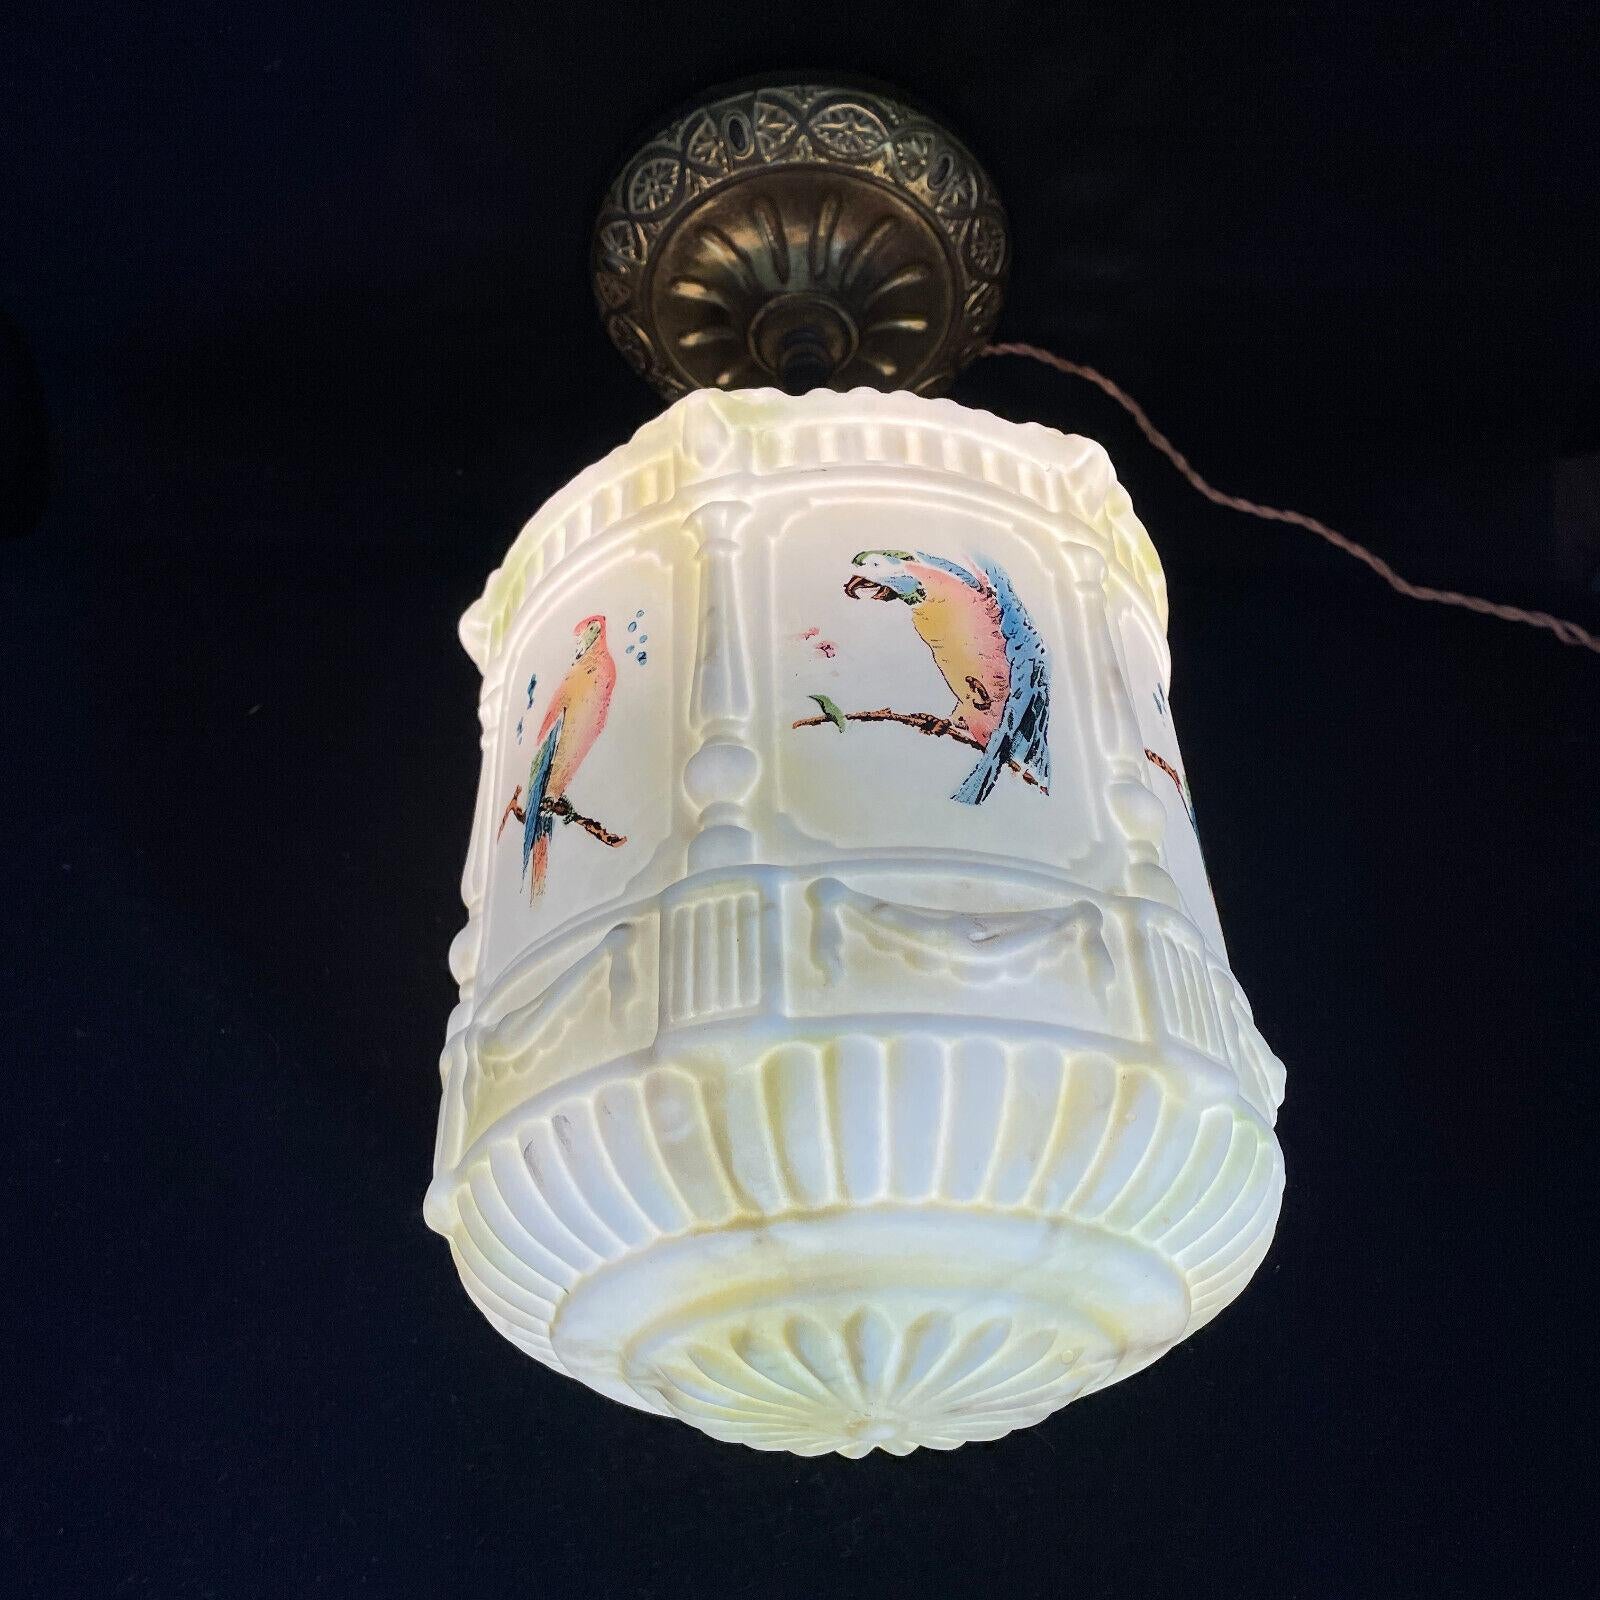 c1920's French Art Deco Opaline Art Glass Ceiling Lantern Fixture with Painted Parrot Panels. Ormolu attachments. Ready to hang.